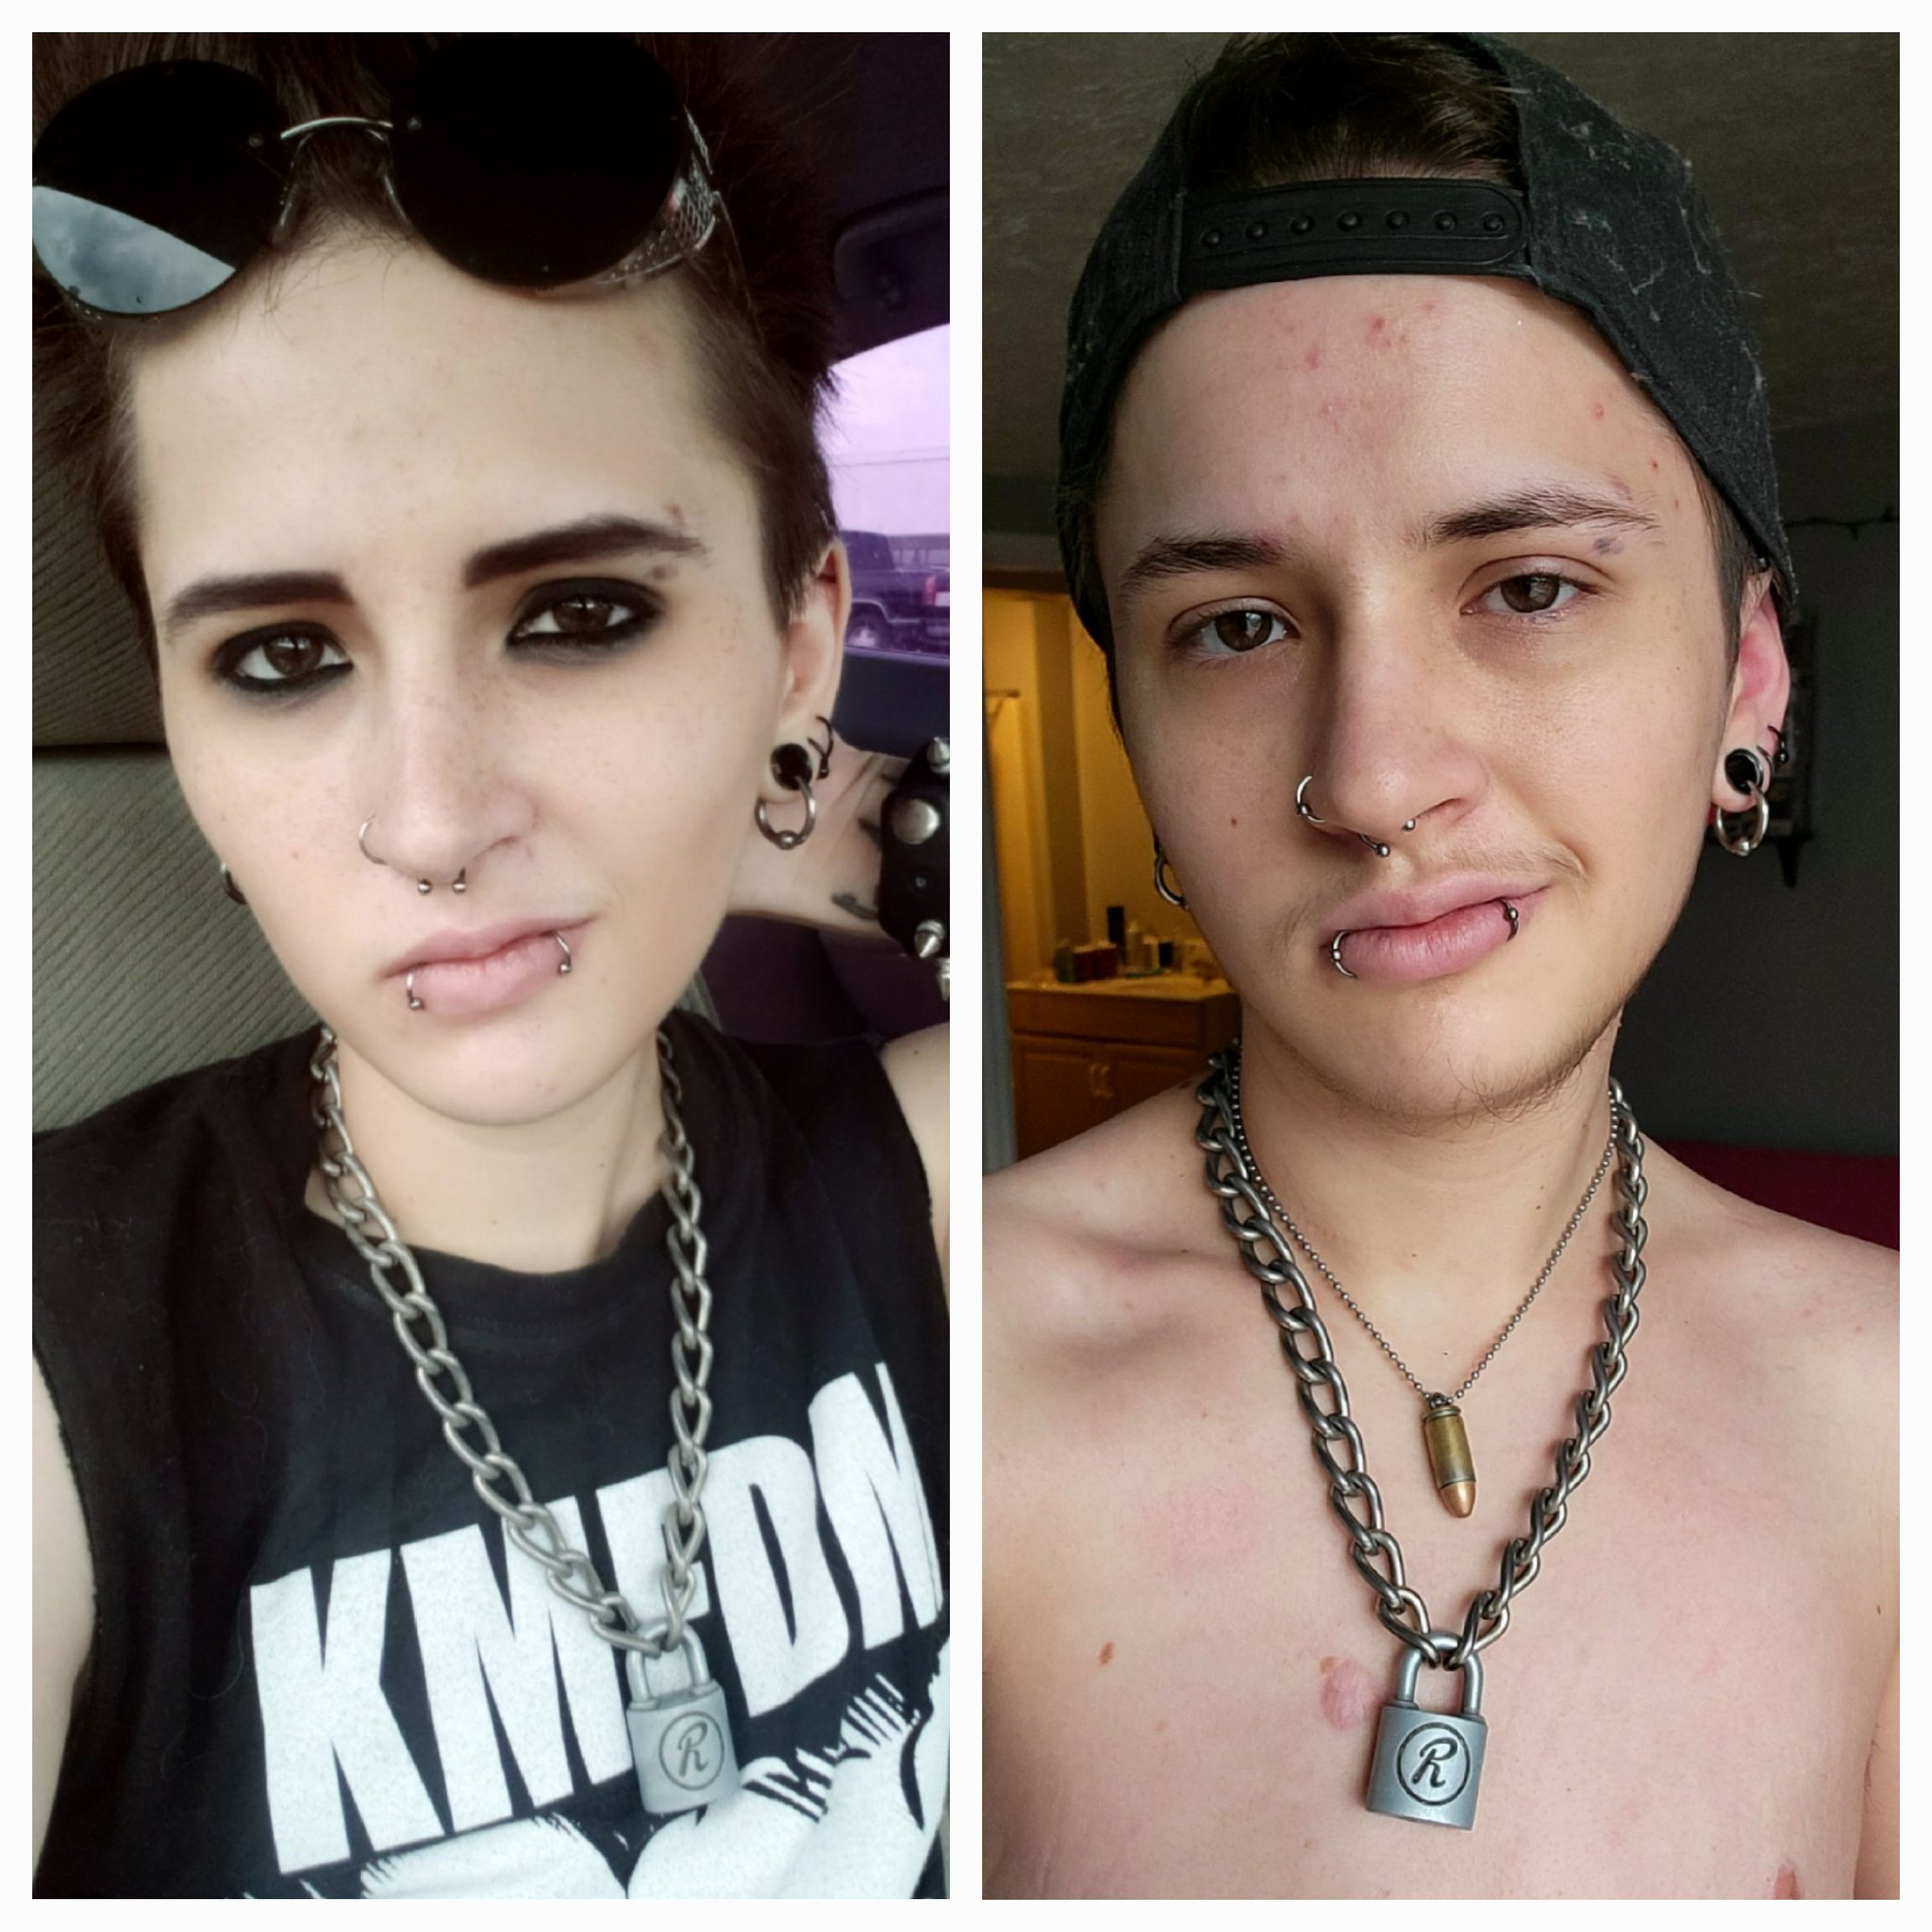 🔥 𝙔𝙀𝙀𝙉 𝘼 𝙏𝙍𝙀𝙉𝘾𝙃 𝘾𝙊𝘼𝙏 🔥 on Twitter: "As of today I have been on T for six months!! Here's a comparison photo from August vs a pic I just took.